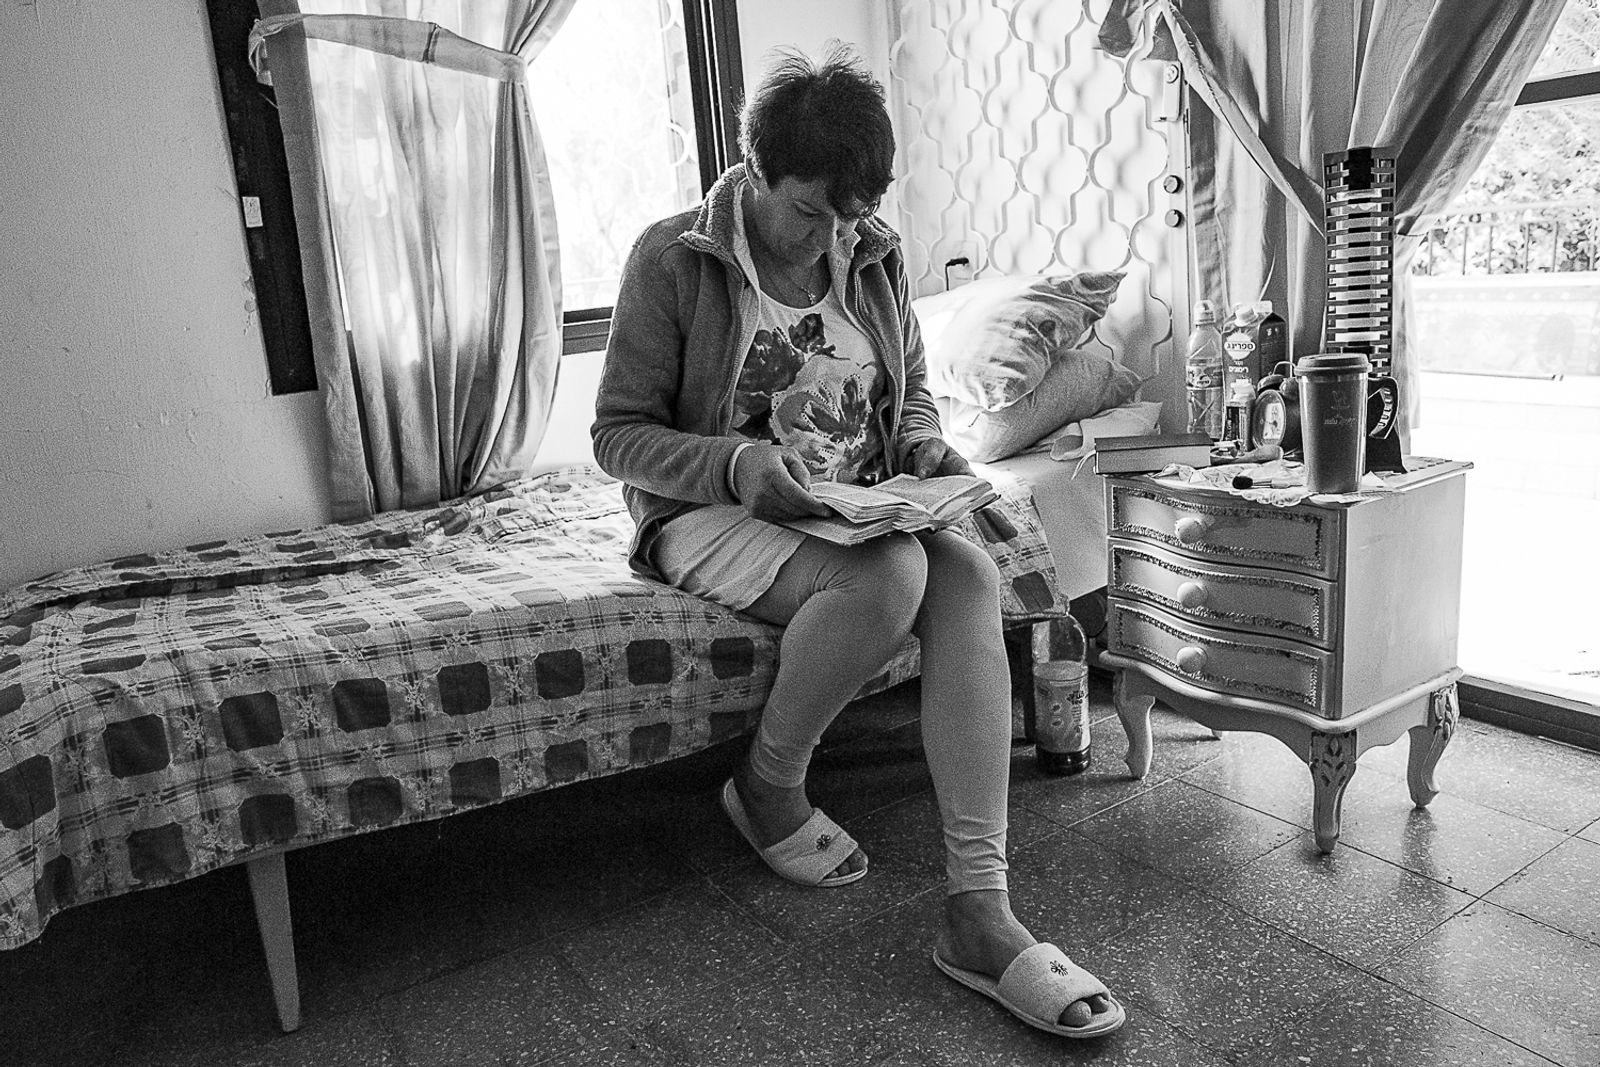 © Efrat Sela - A room of one's own, Katzrin, North Israel Sep. 2016